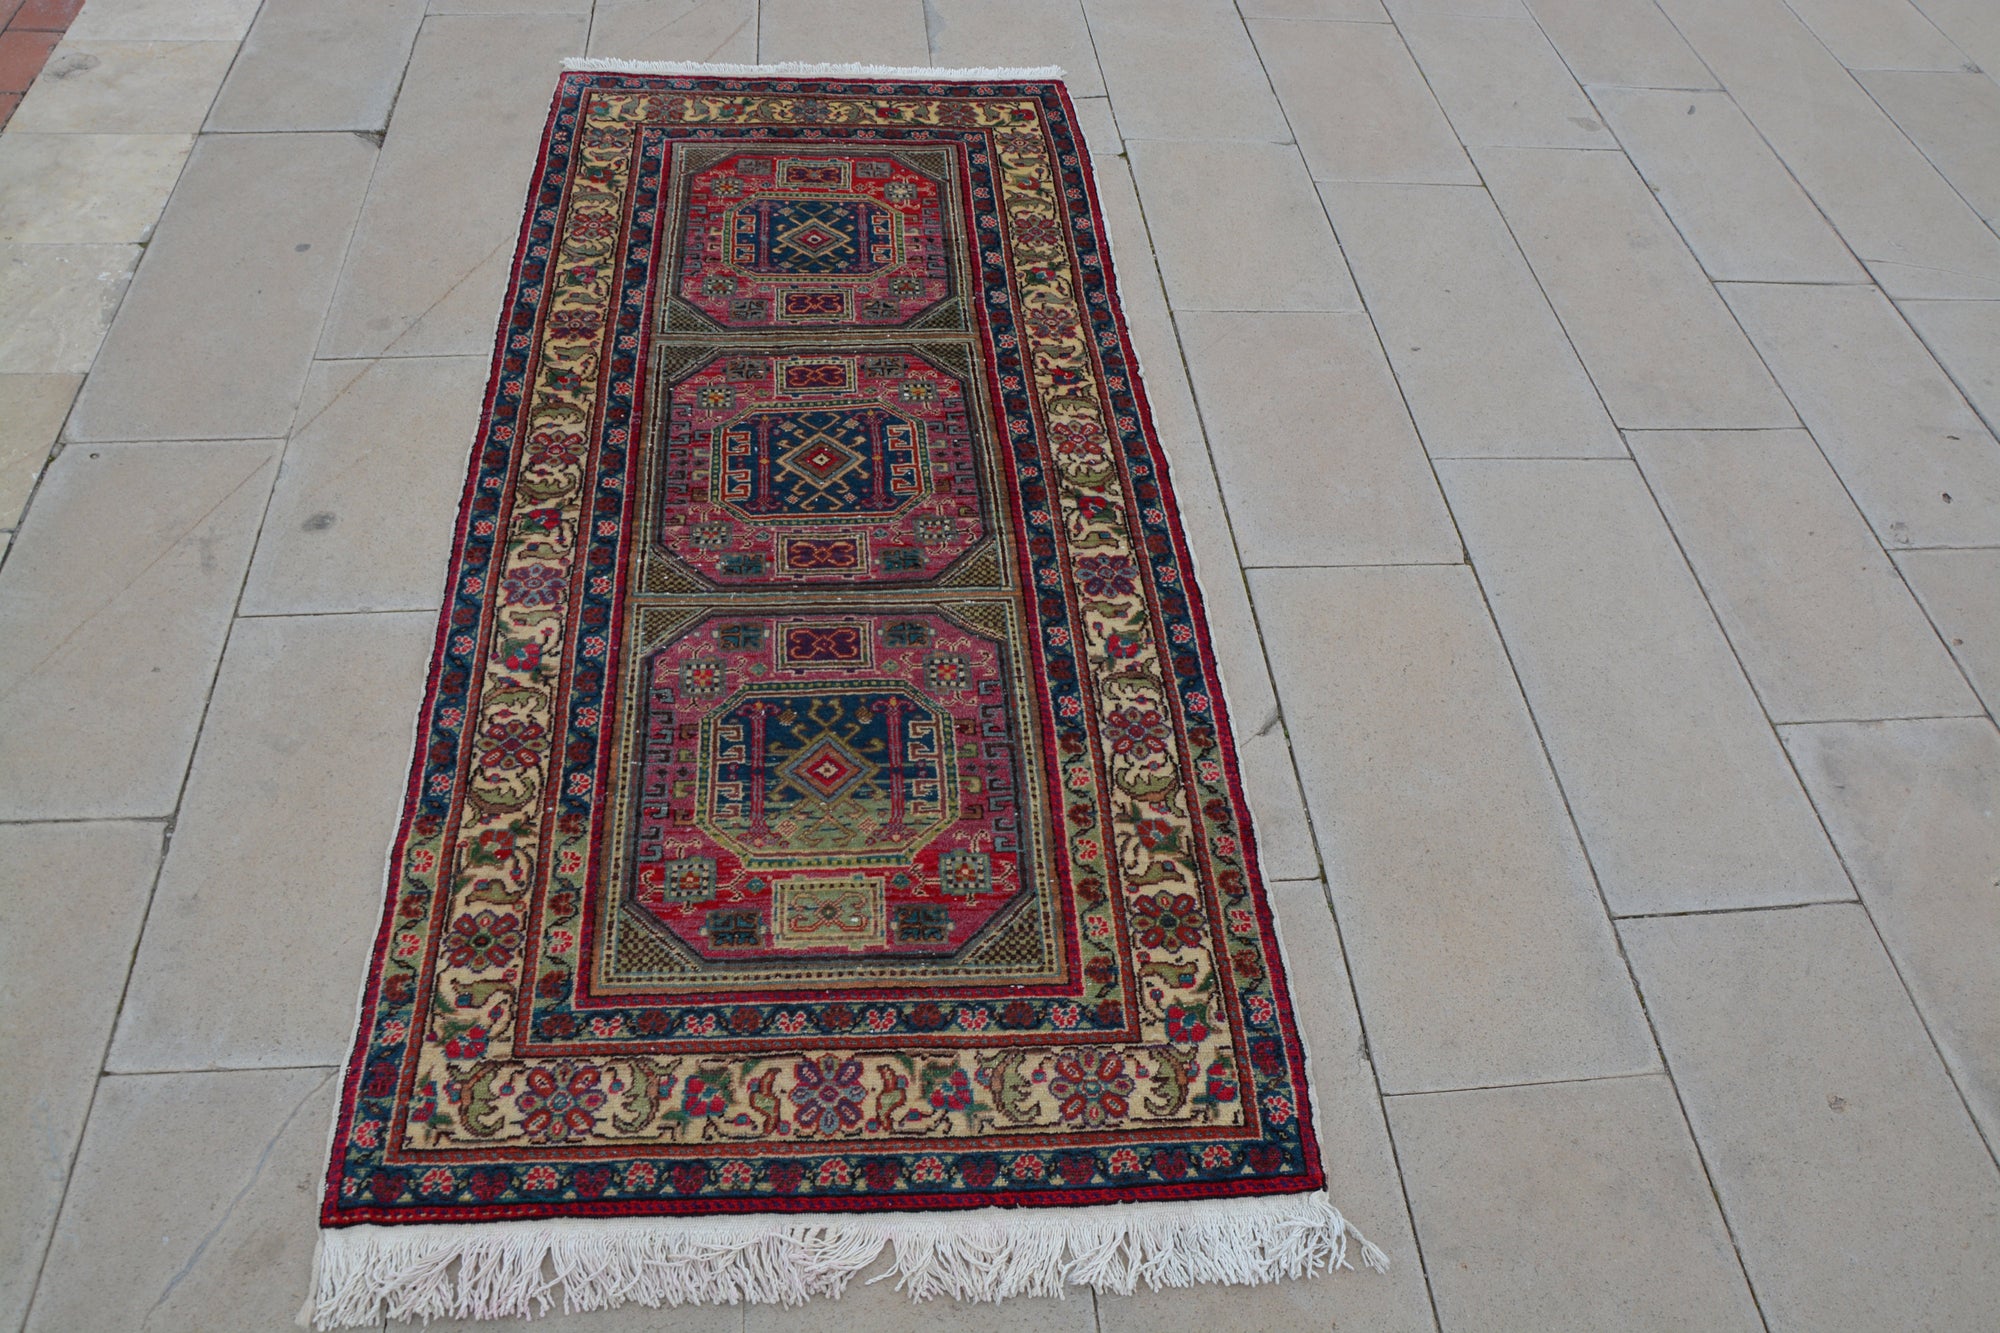 Authentic Turkish Rugs, Orian Rugs, Traditional Oriental Rugs, Quality Rugs, Rectangle Area Rugs,             2.9 x 6.5  Feet AG1042